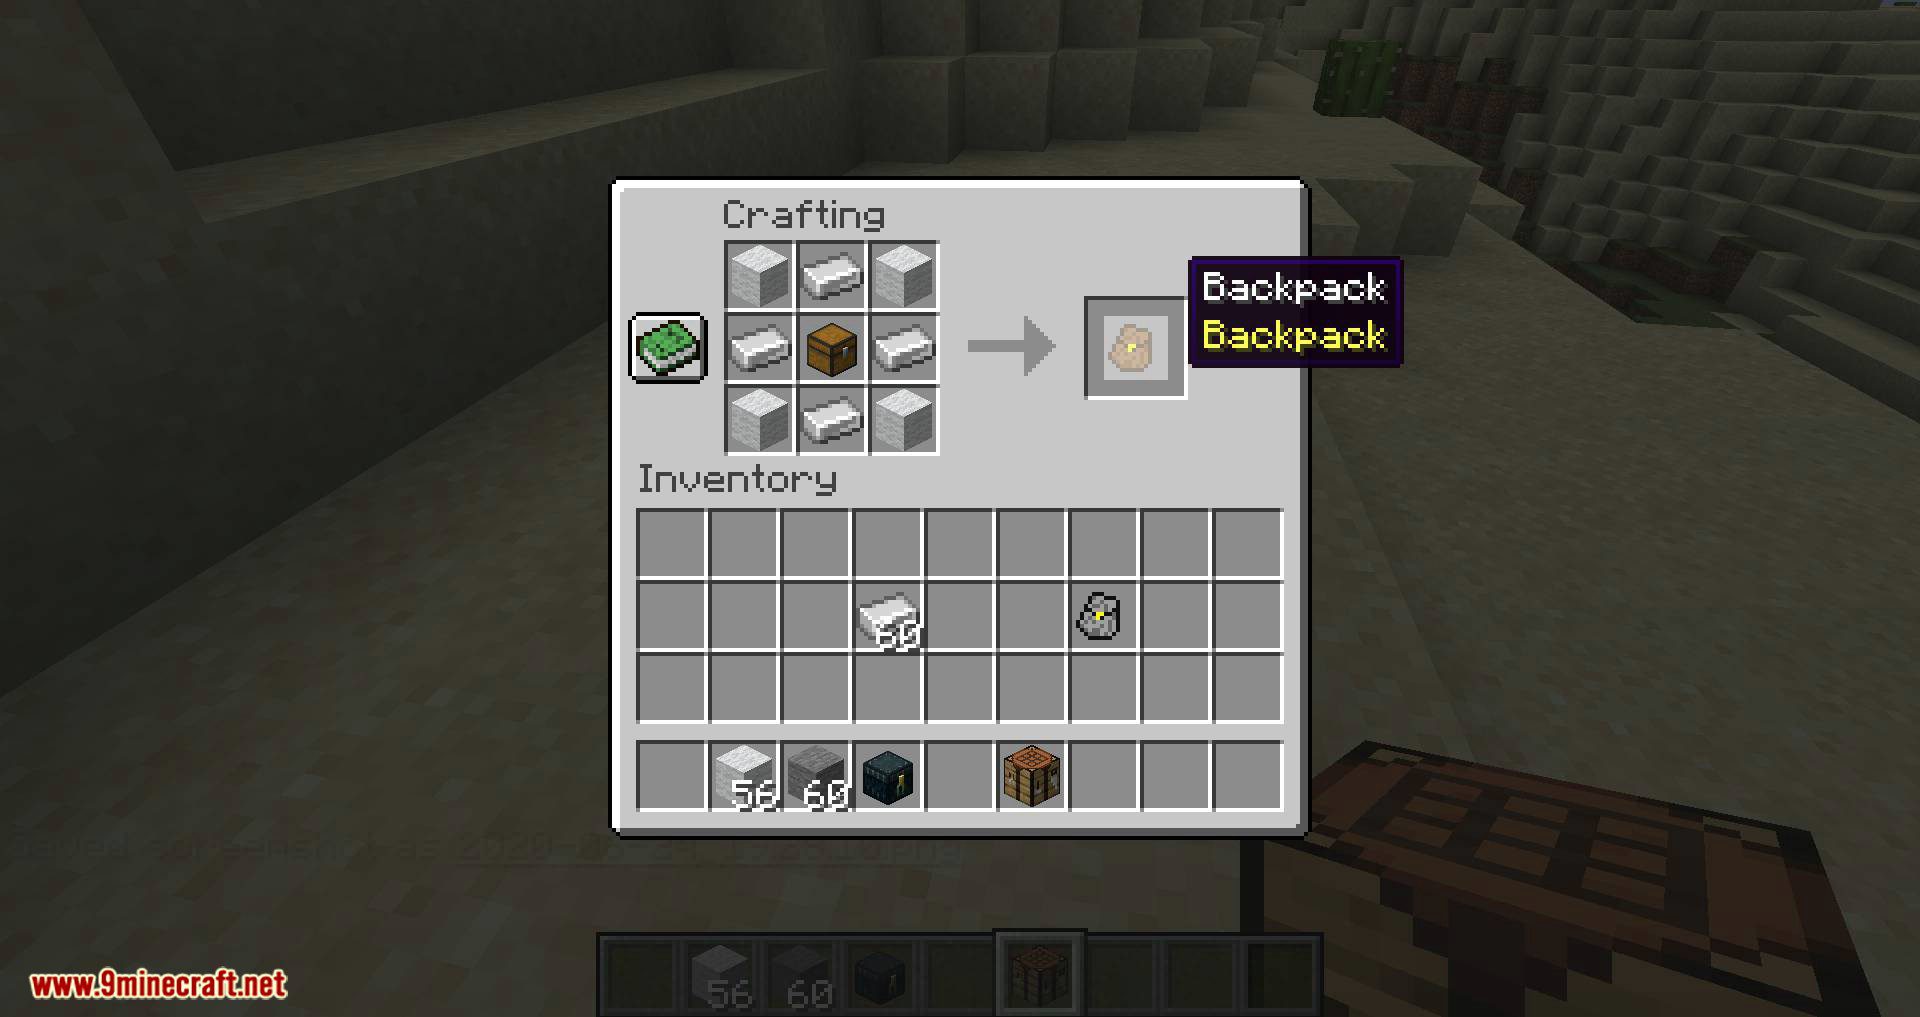 Simple Backpack Mod 1.16.3/1.16.1 (More Ways to Store Items